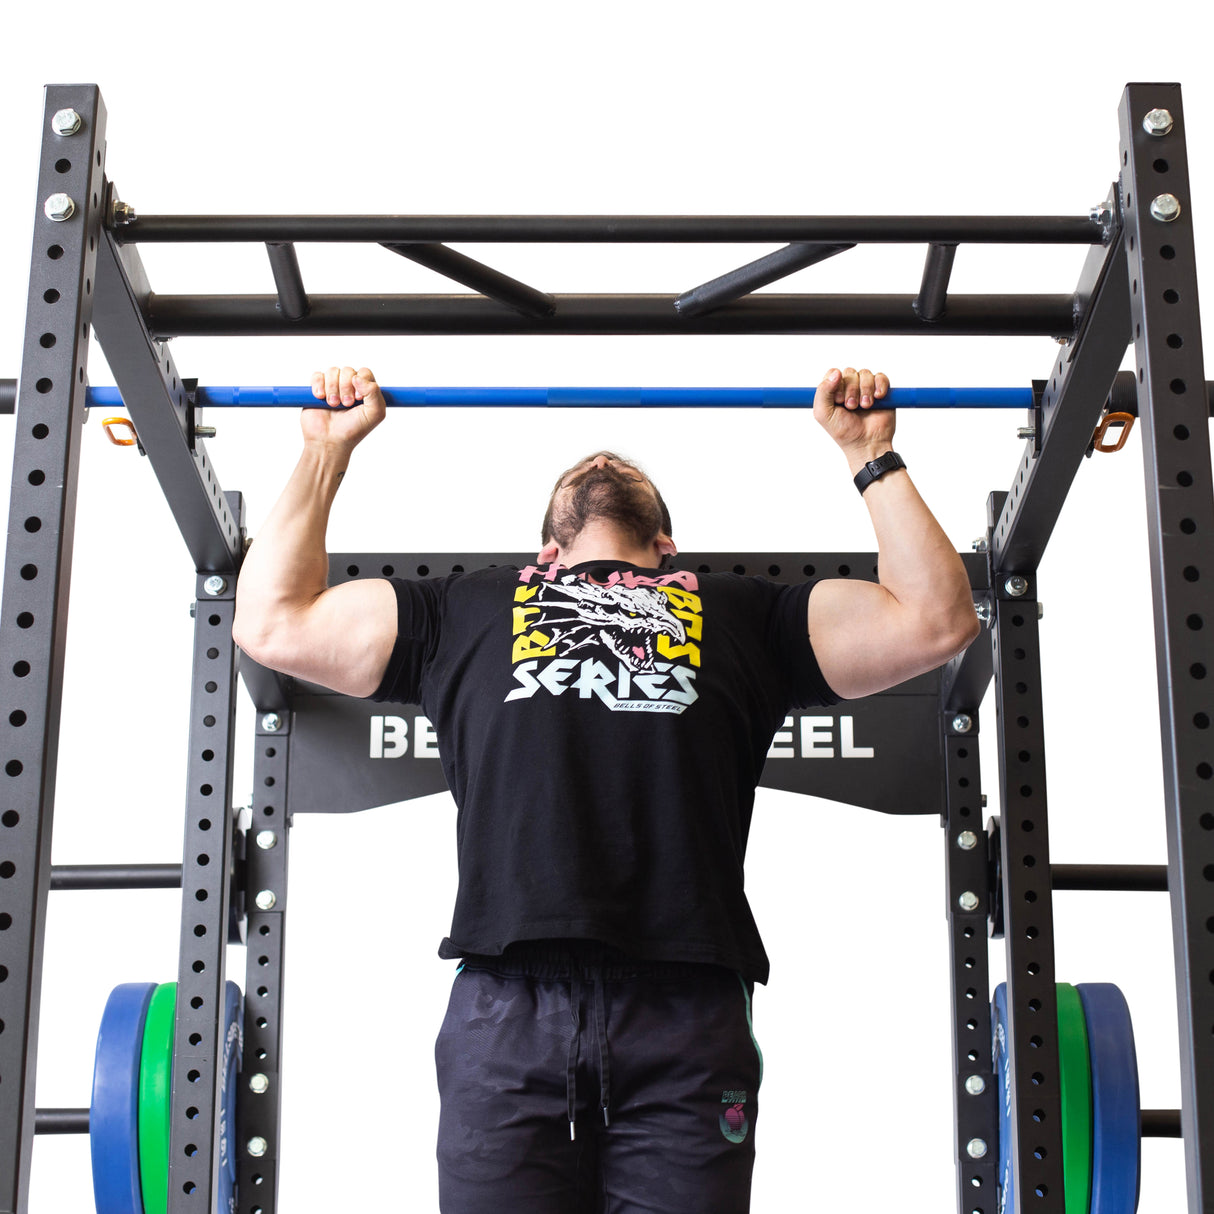 Barbell holder above rack used by male athlete for pull-ups.